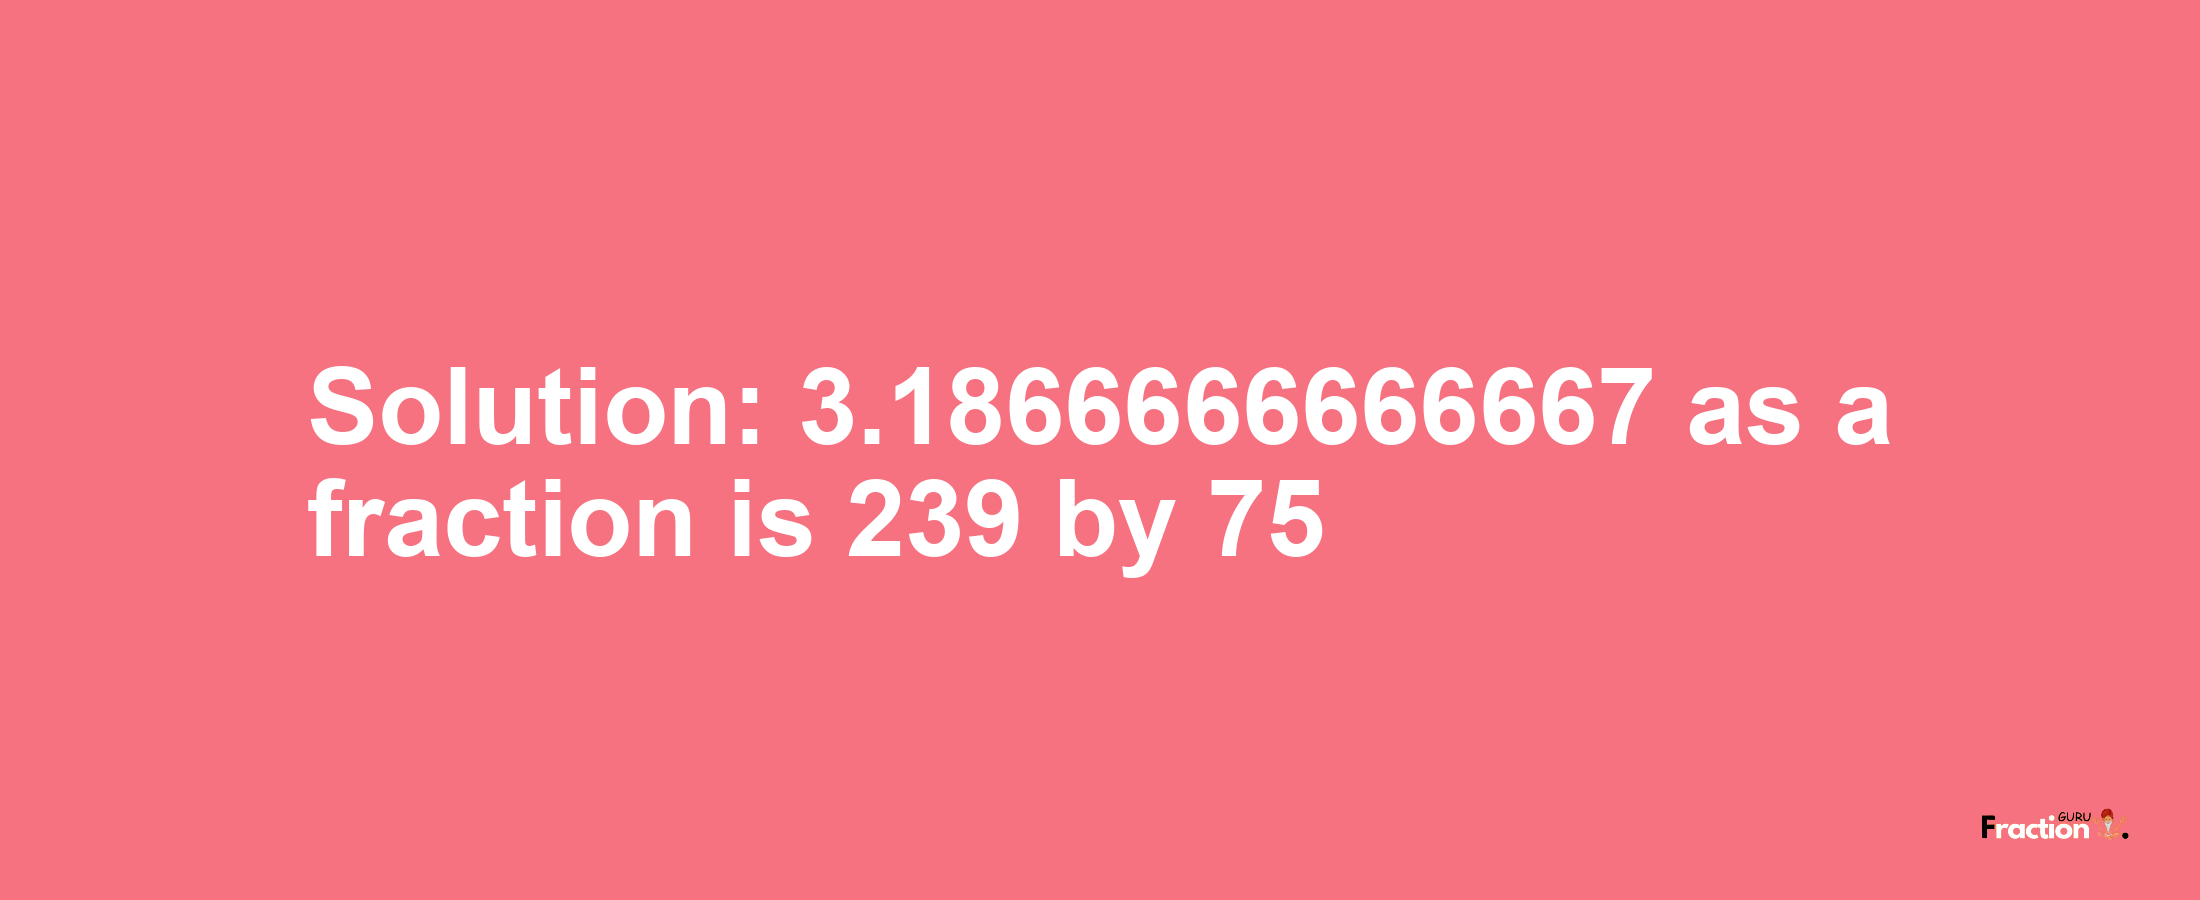 Solution:3.1866666666667 as a fraction is 239/75